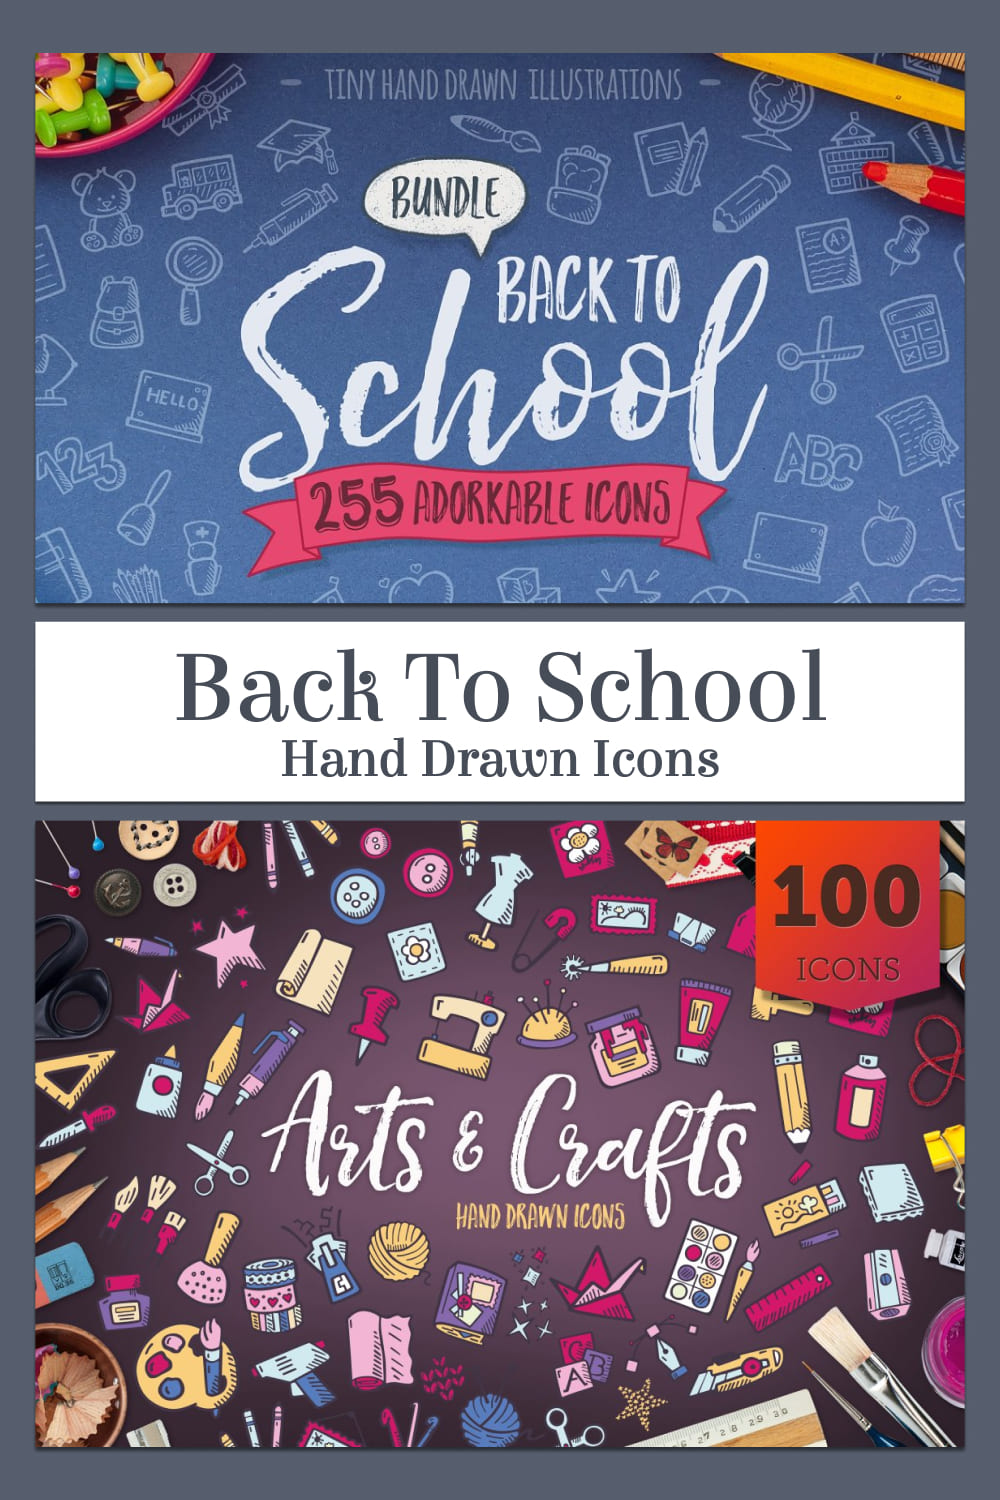 Back to school hand drawn icons - pinterest image preview.